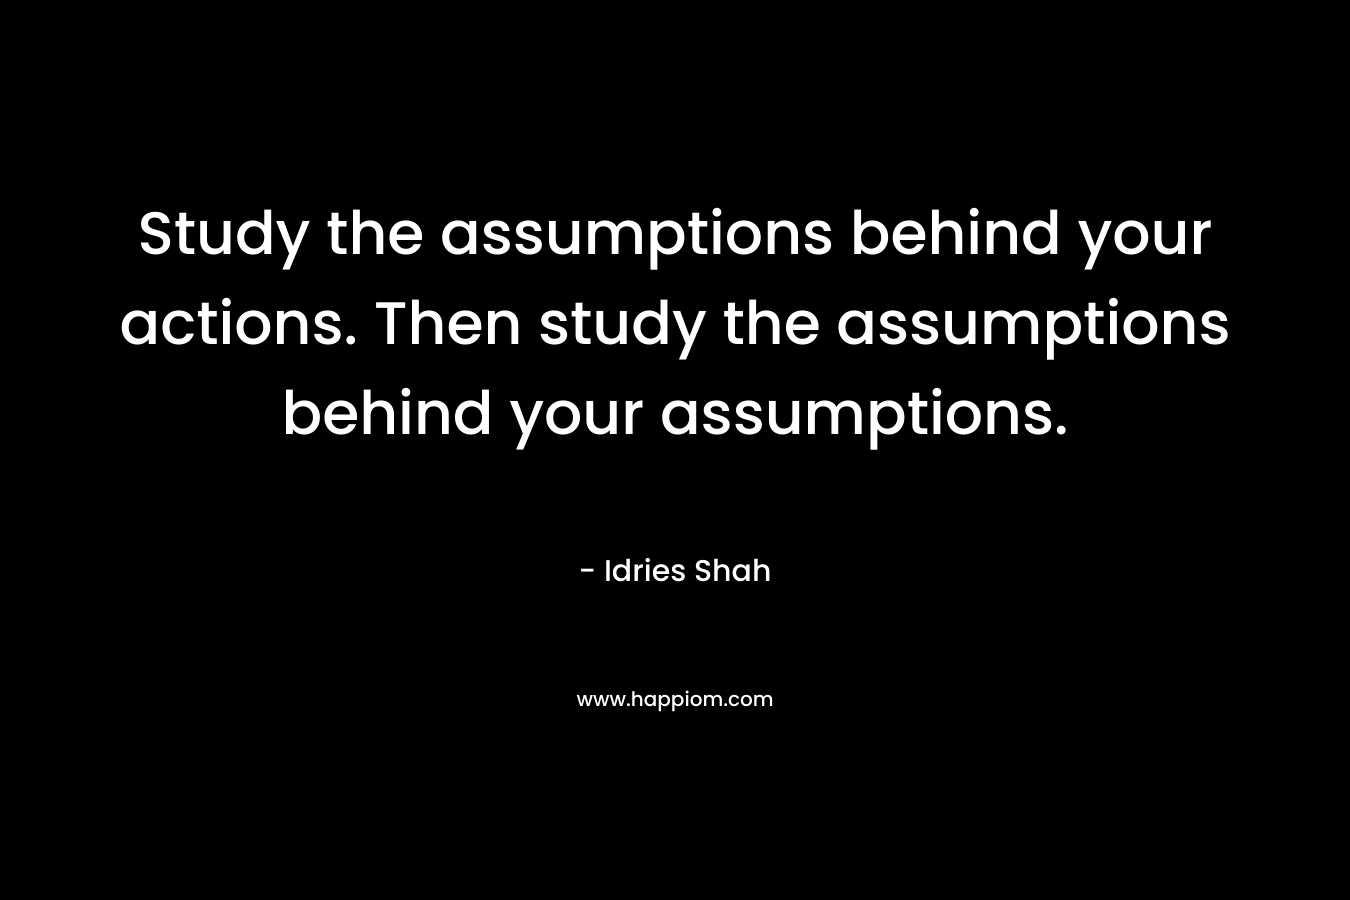 Study the assumptions behind your actions. Then study the assumptions behind your assumptions.